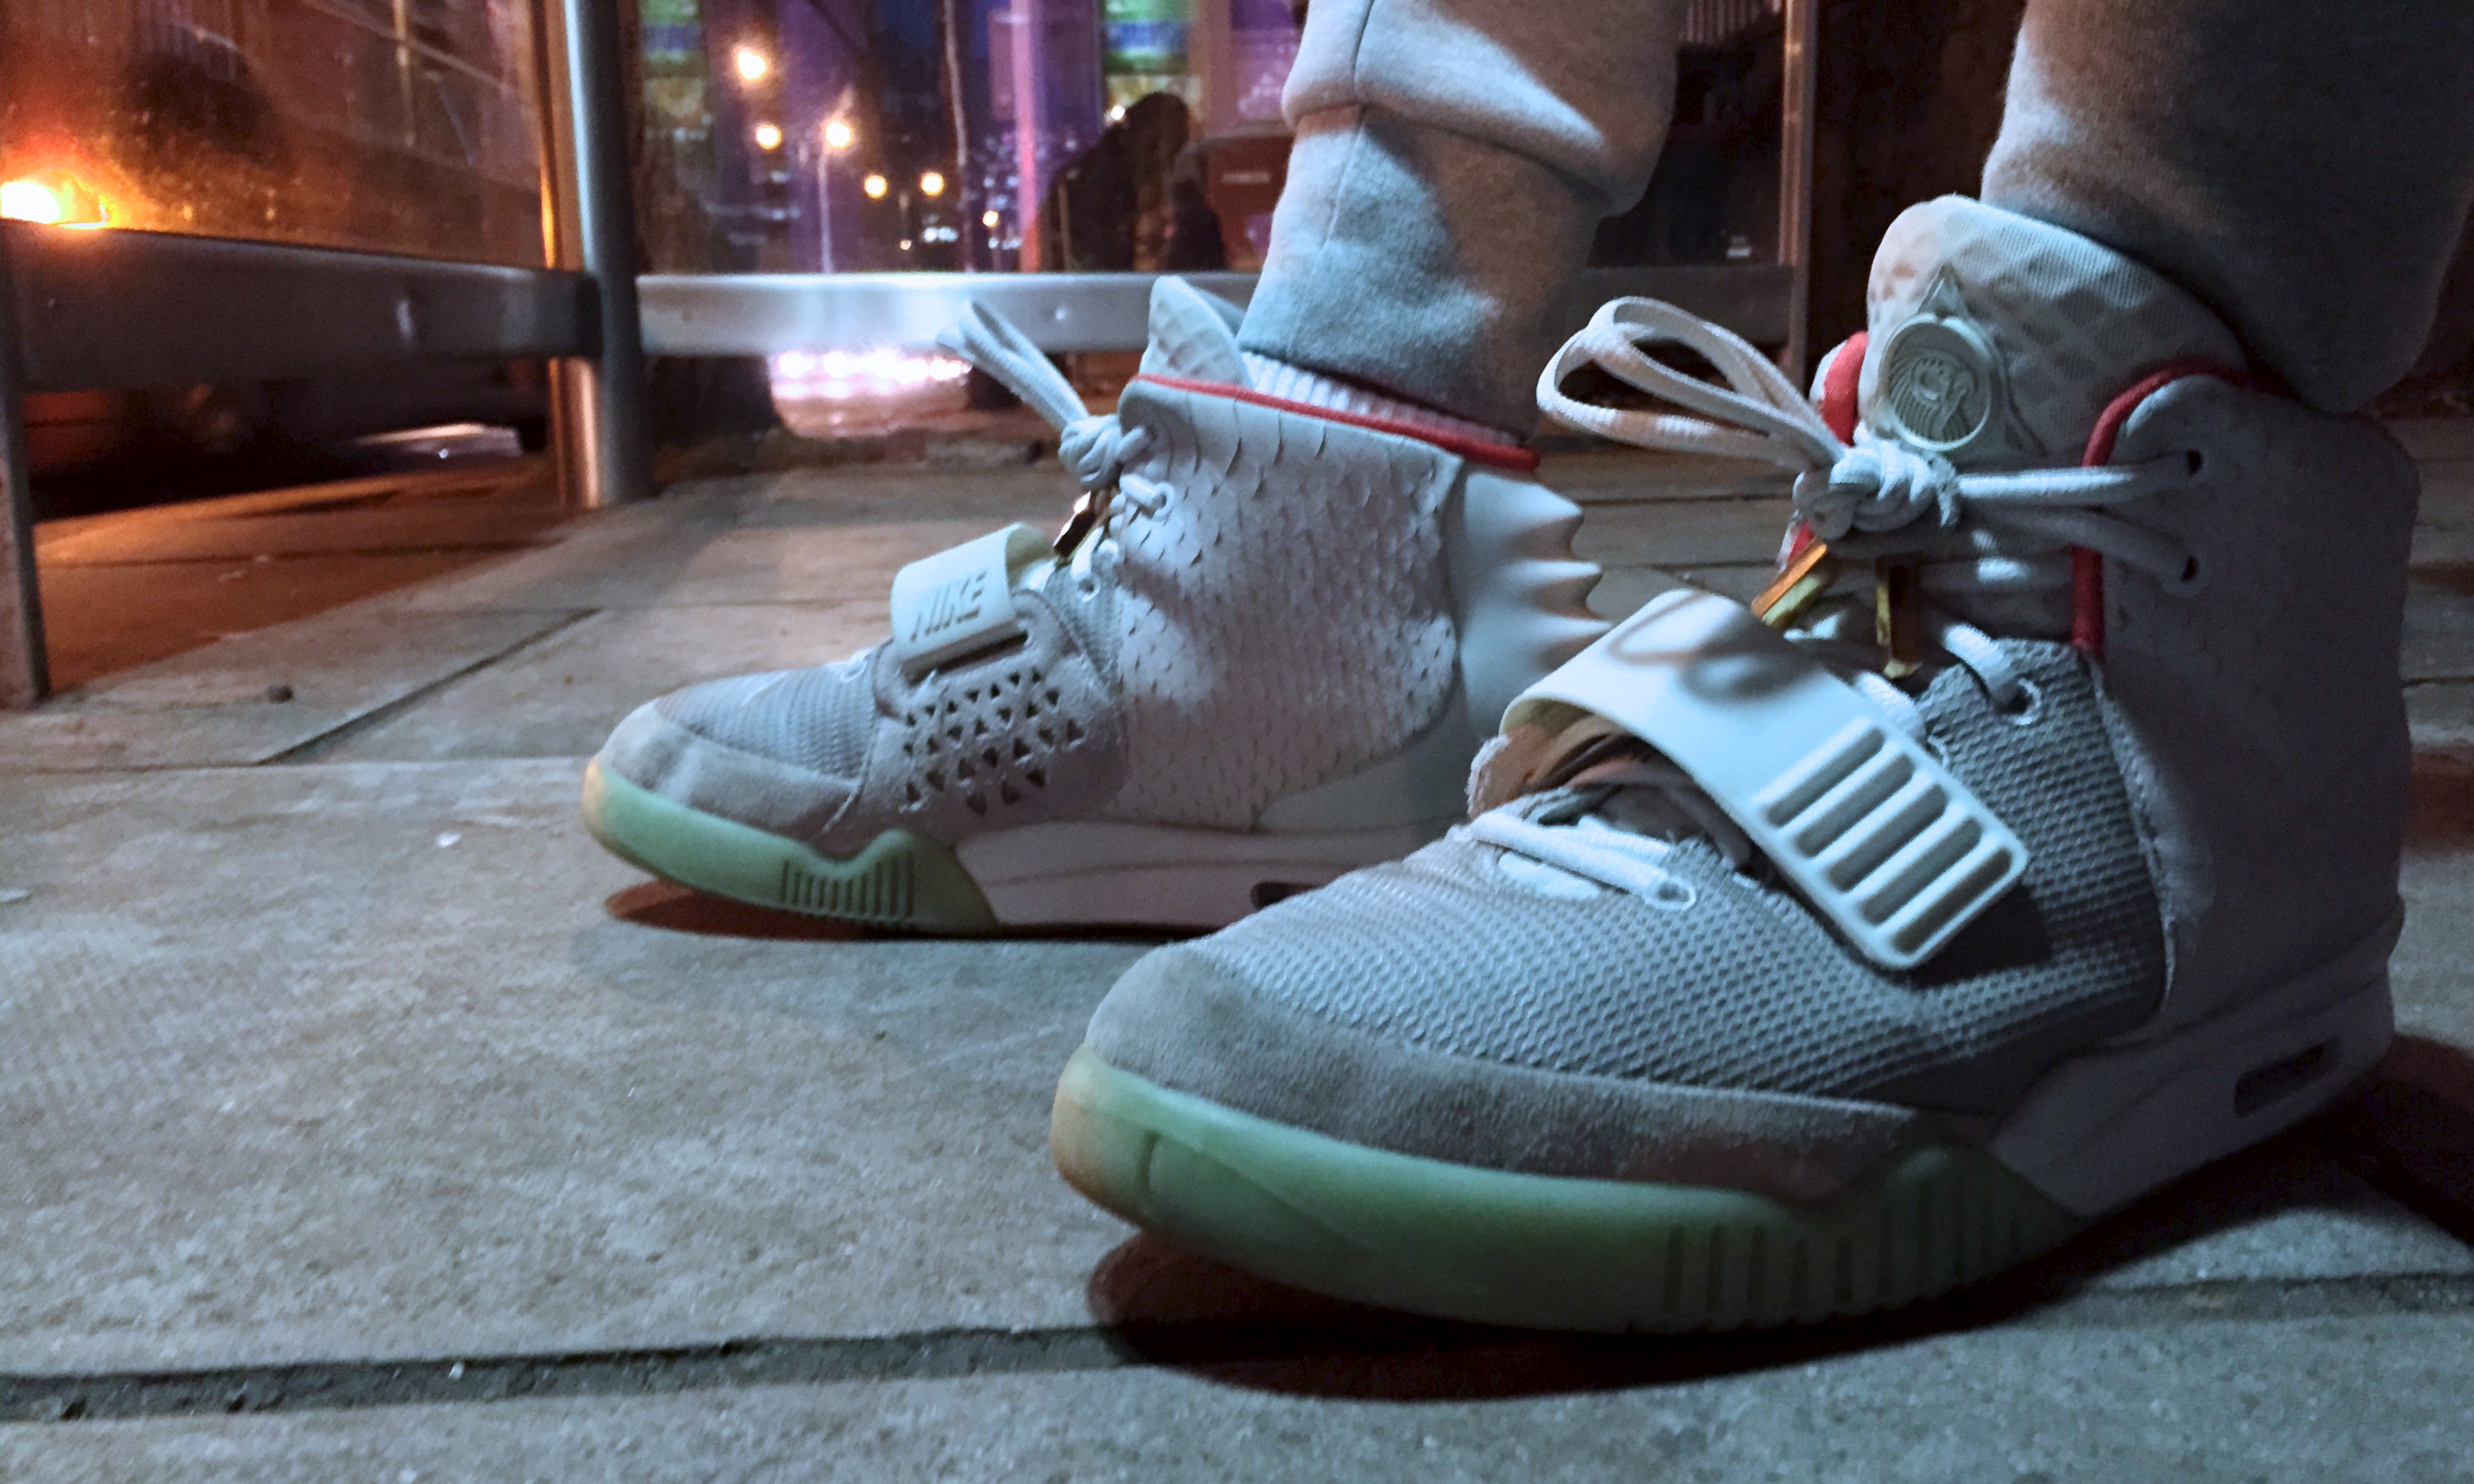 How to lace Nike Air Yeezy 2 